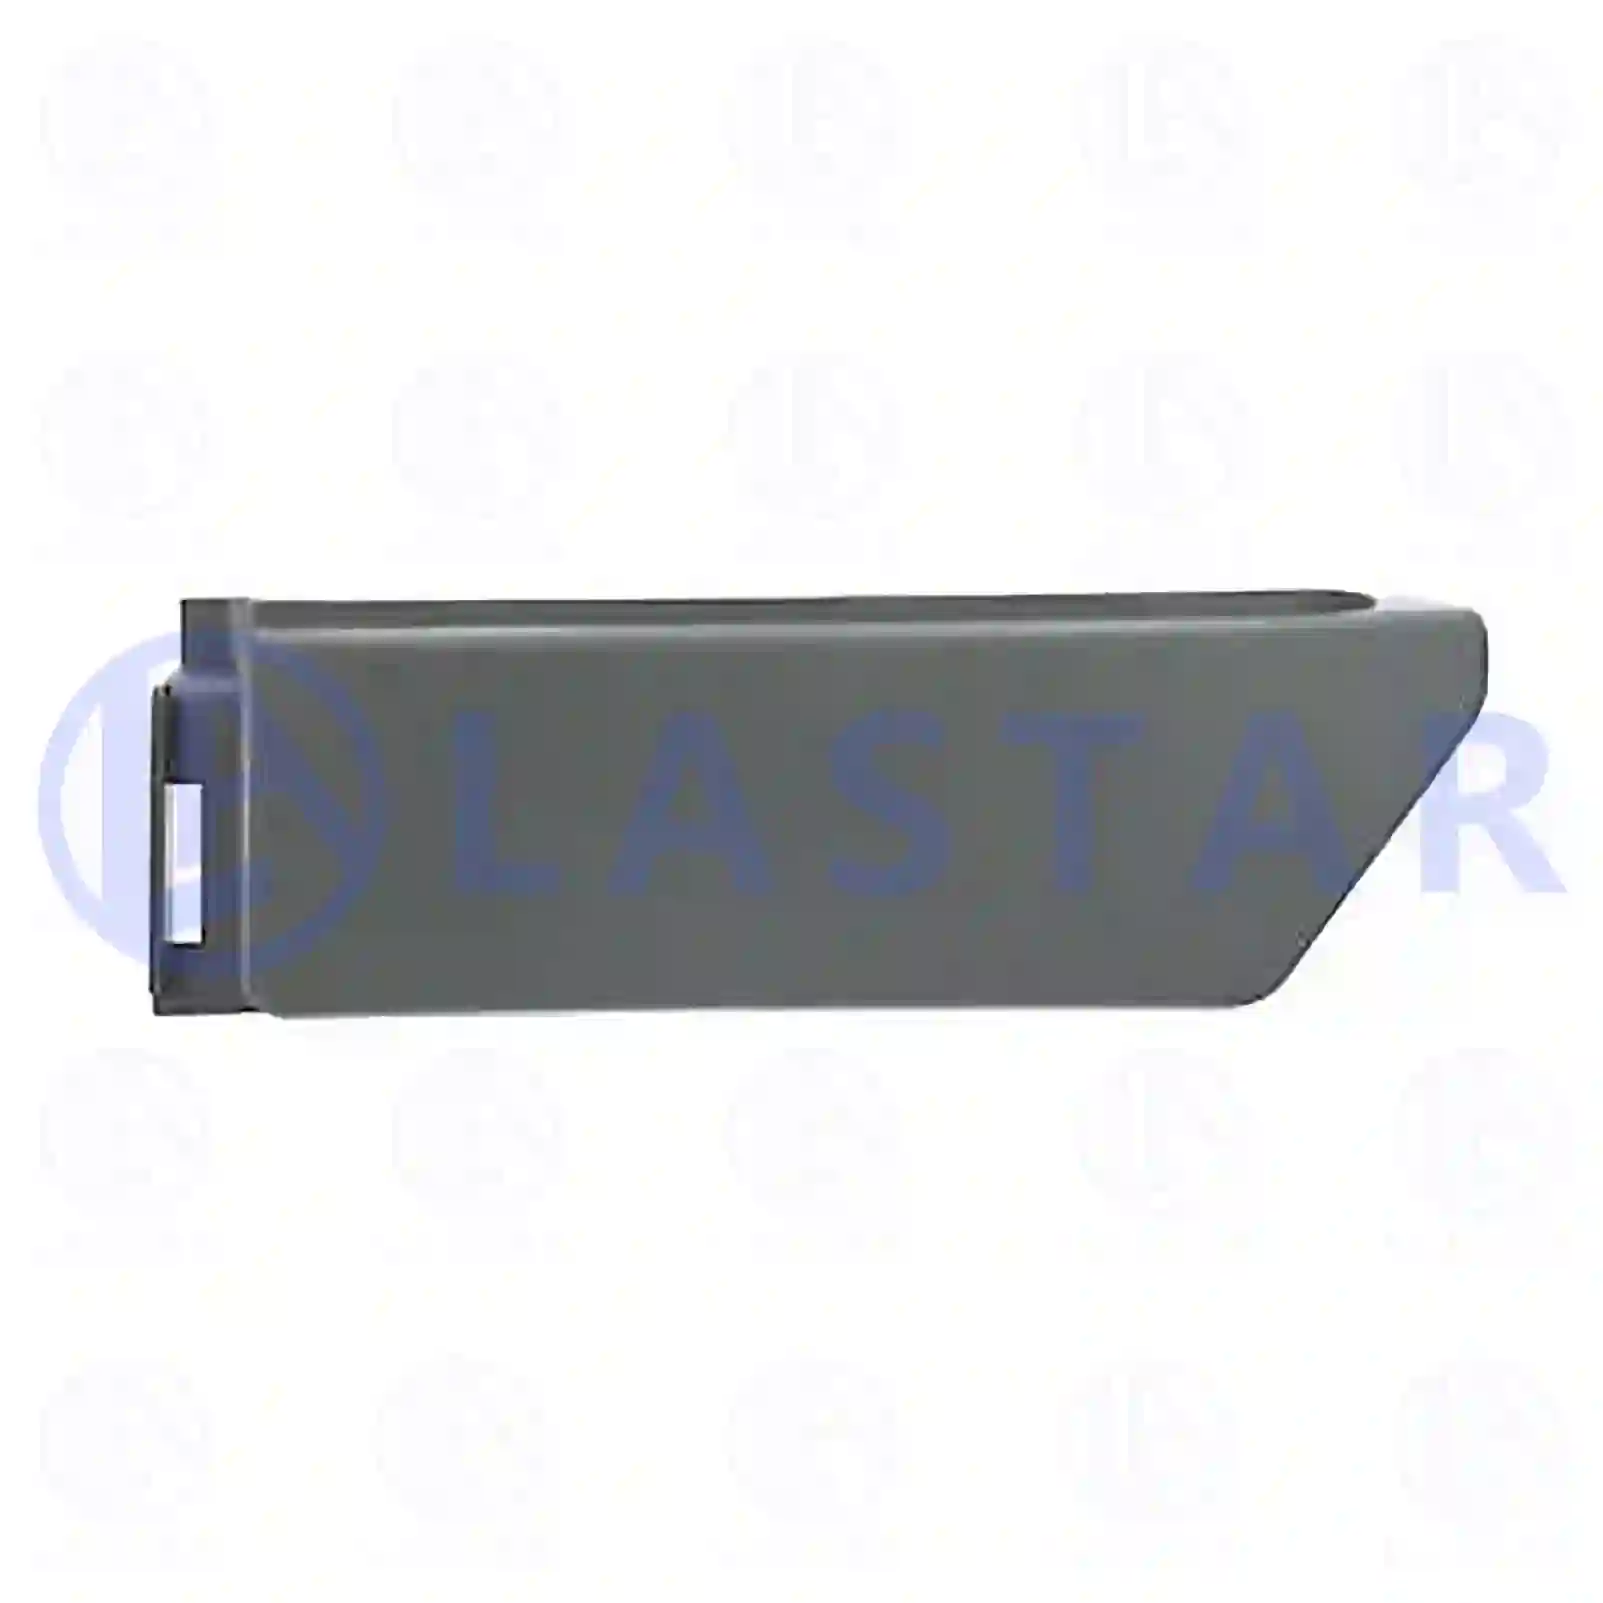 Cover, lateral, left, 77719462, 9438801336, 94388013367C72 ||  77719462 Lastar Spare Part | Truck Spare Parts, Auotomotive Spare Parts Cover, lateral, left, 77719462, 9438801336, 94388013367C72 ||  77719462 Lastar Spare Part | Truck Spare Parts, Auotomotive Spare Parts